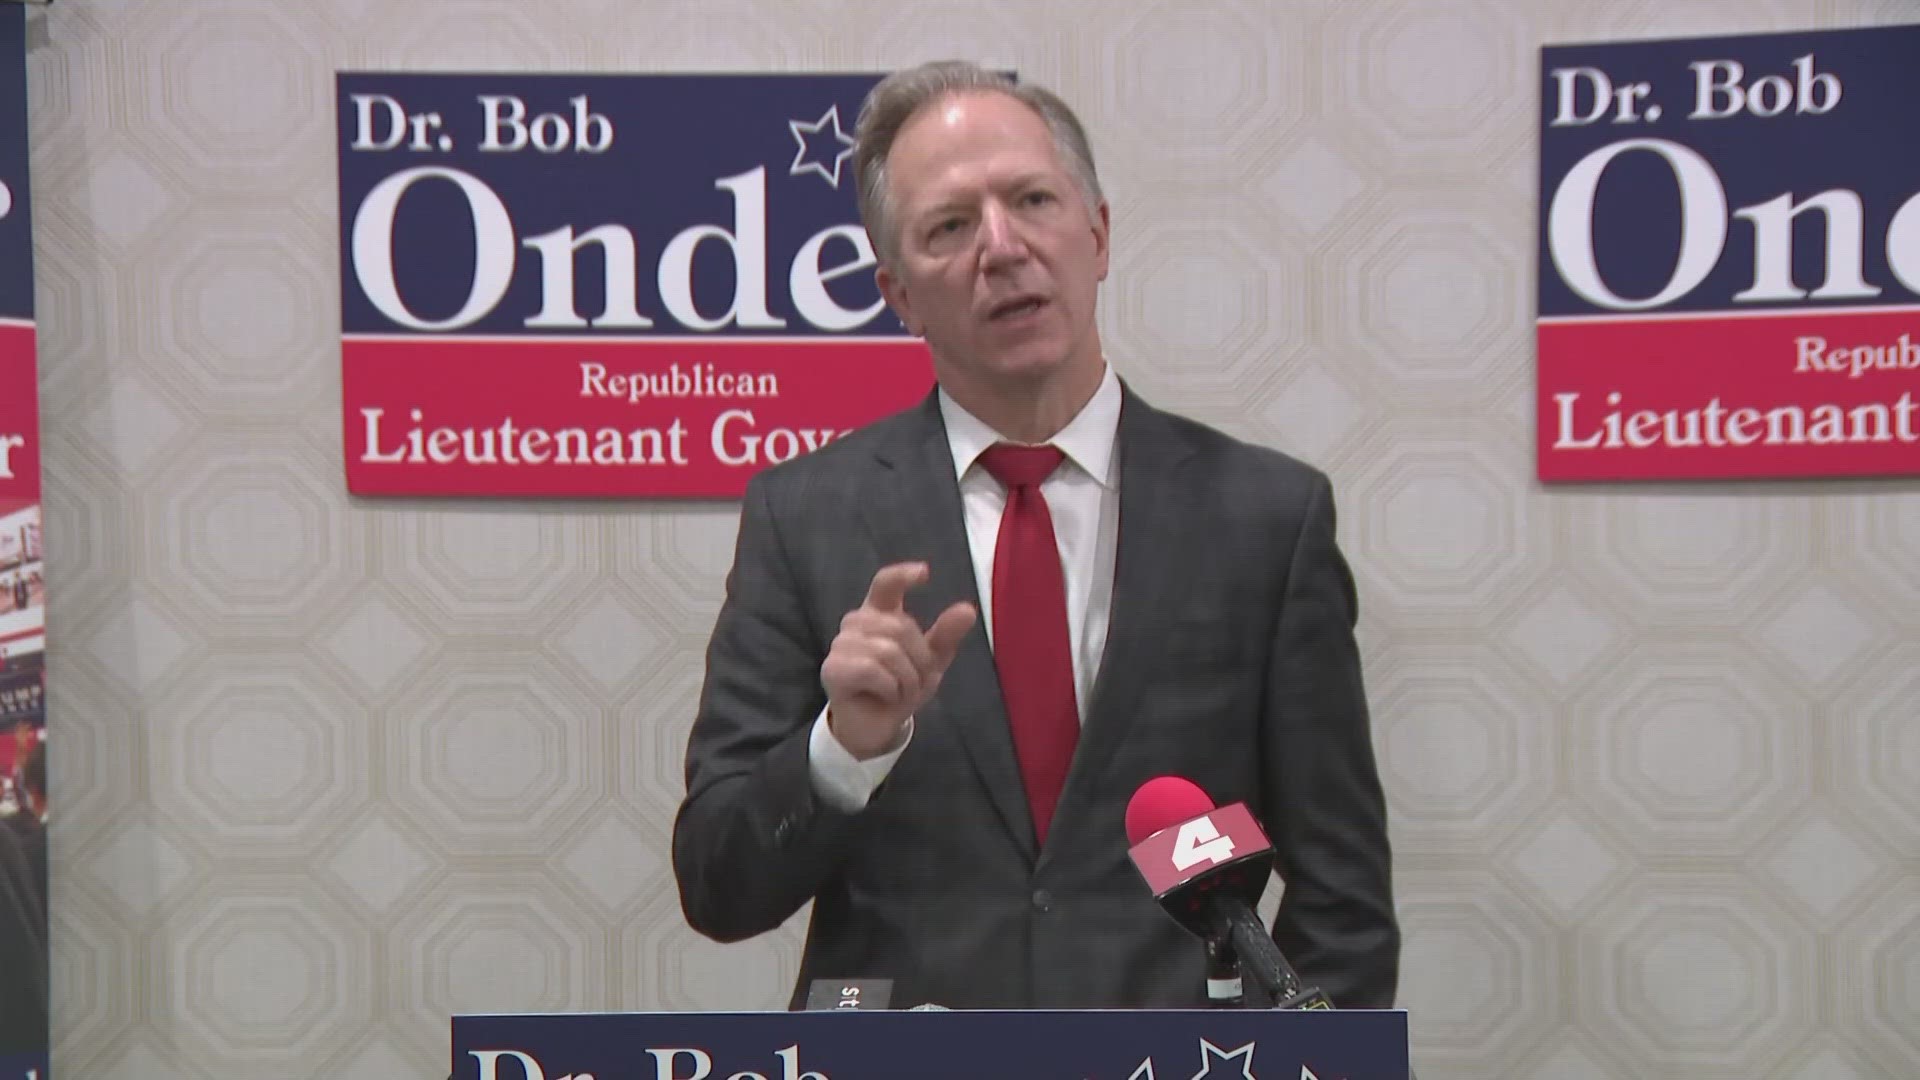 Former state Sen. Bob Onder announced that he’s no longer running for lieutenant governor. He will instead seek the GOP nomination in the 3rd Congressional District.